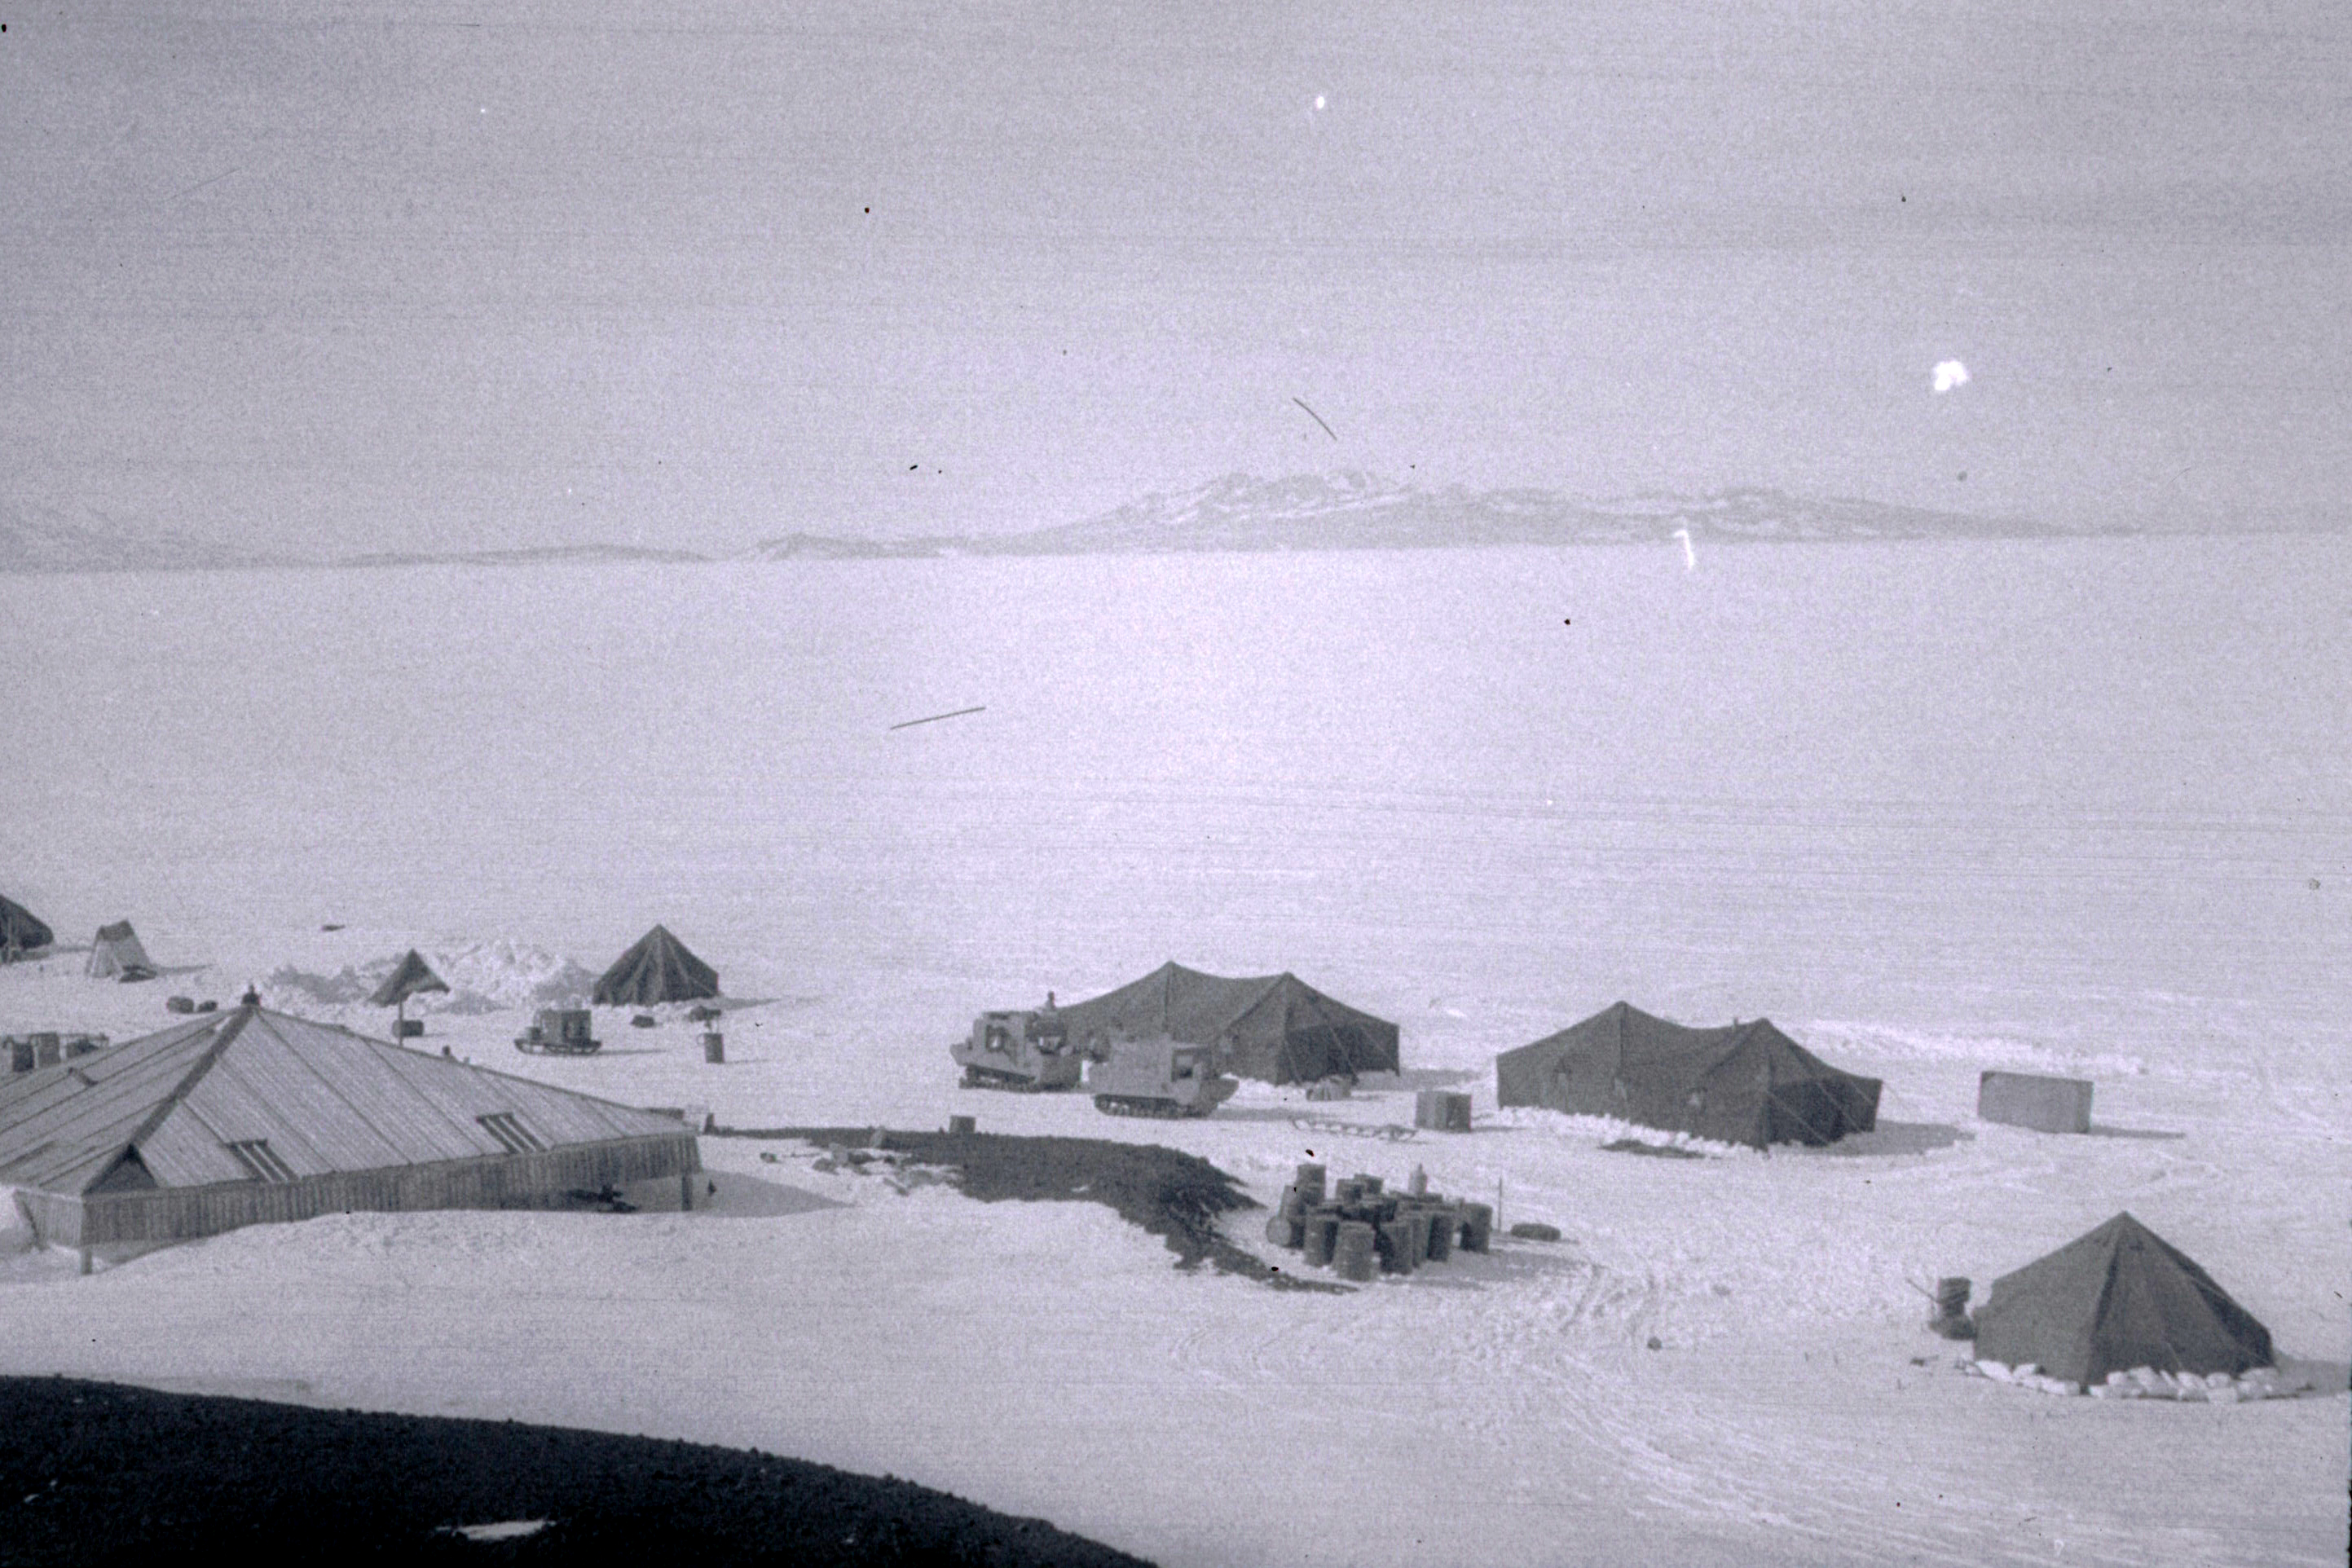 Tents on snow sit near a wooden building. 